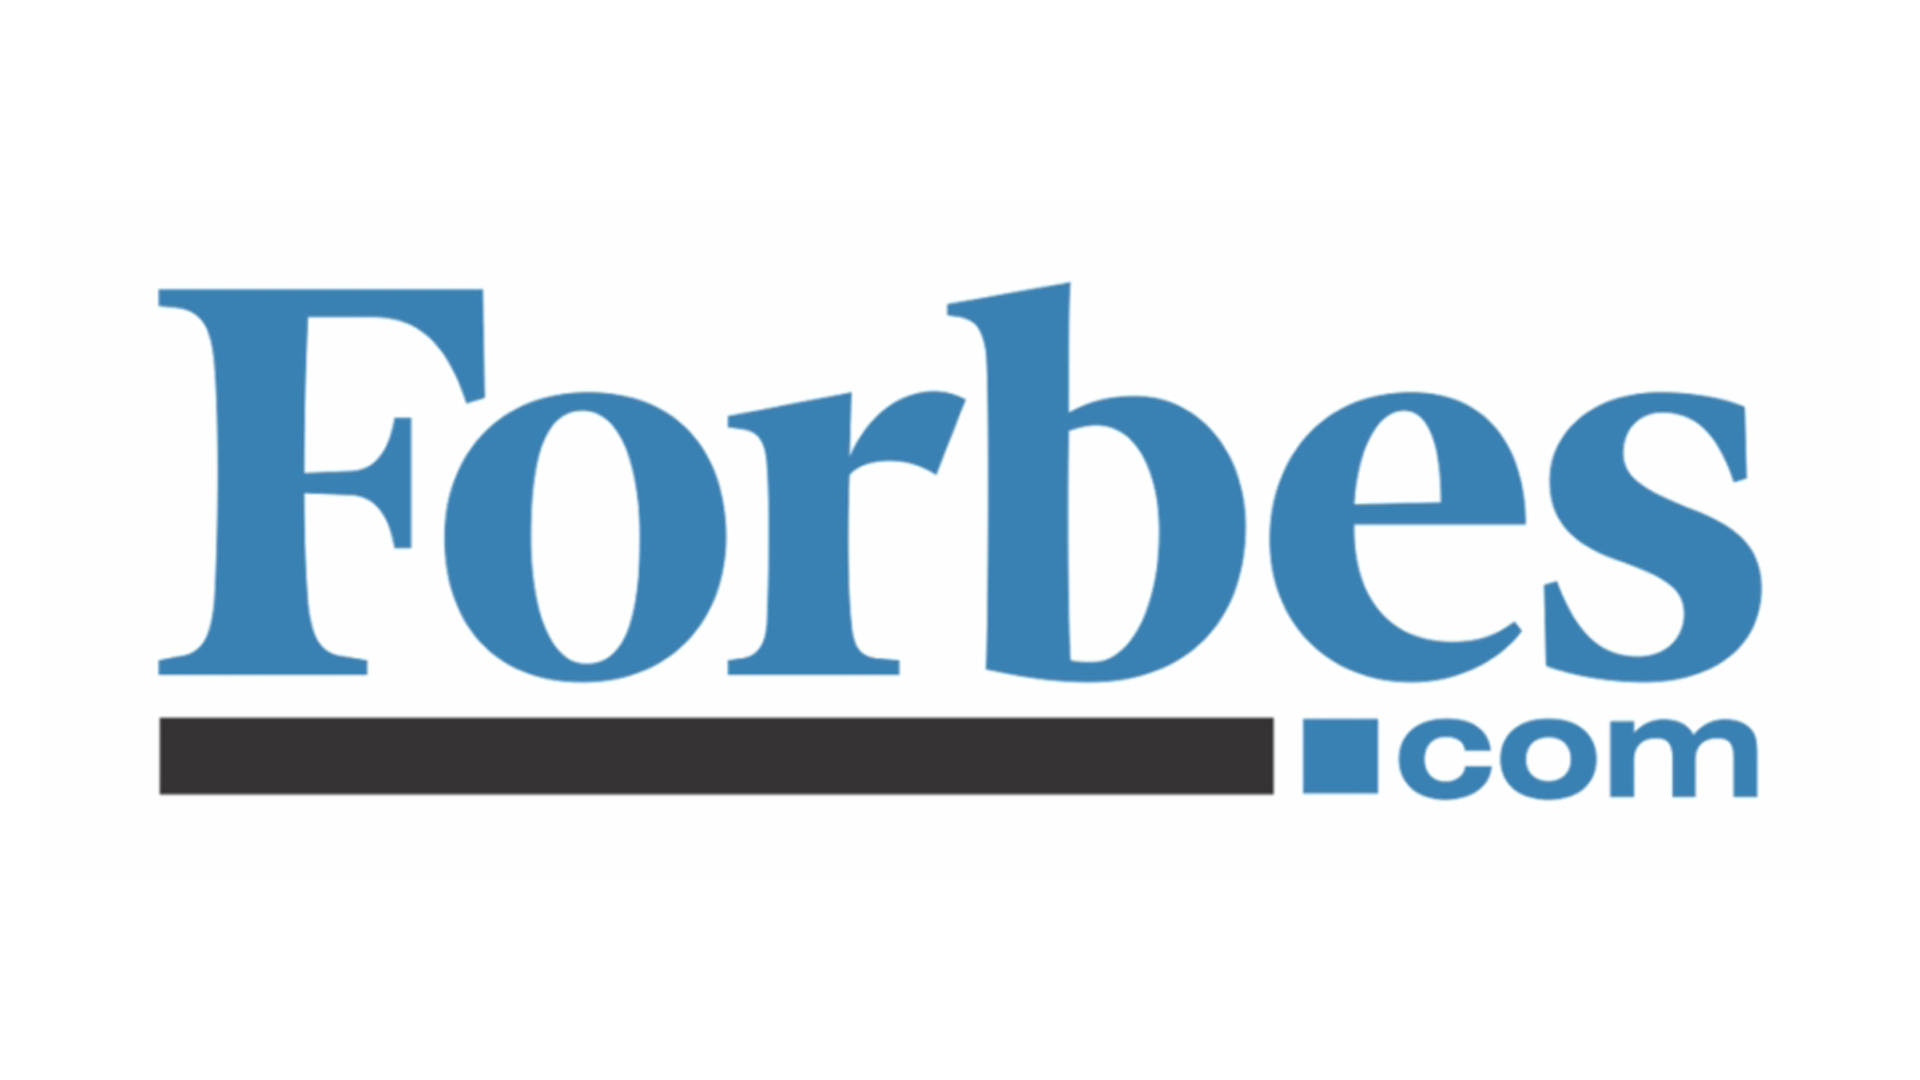 Michael Kureth Featured Article in Forbes.com Covering "Whiteboard Challenge"